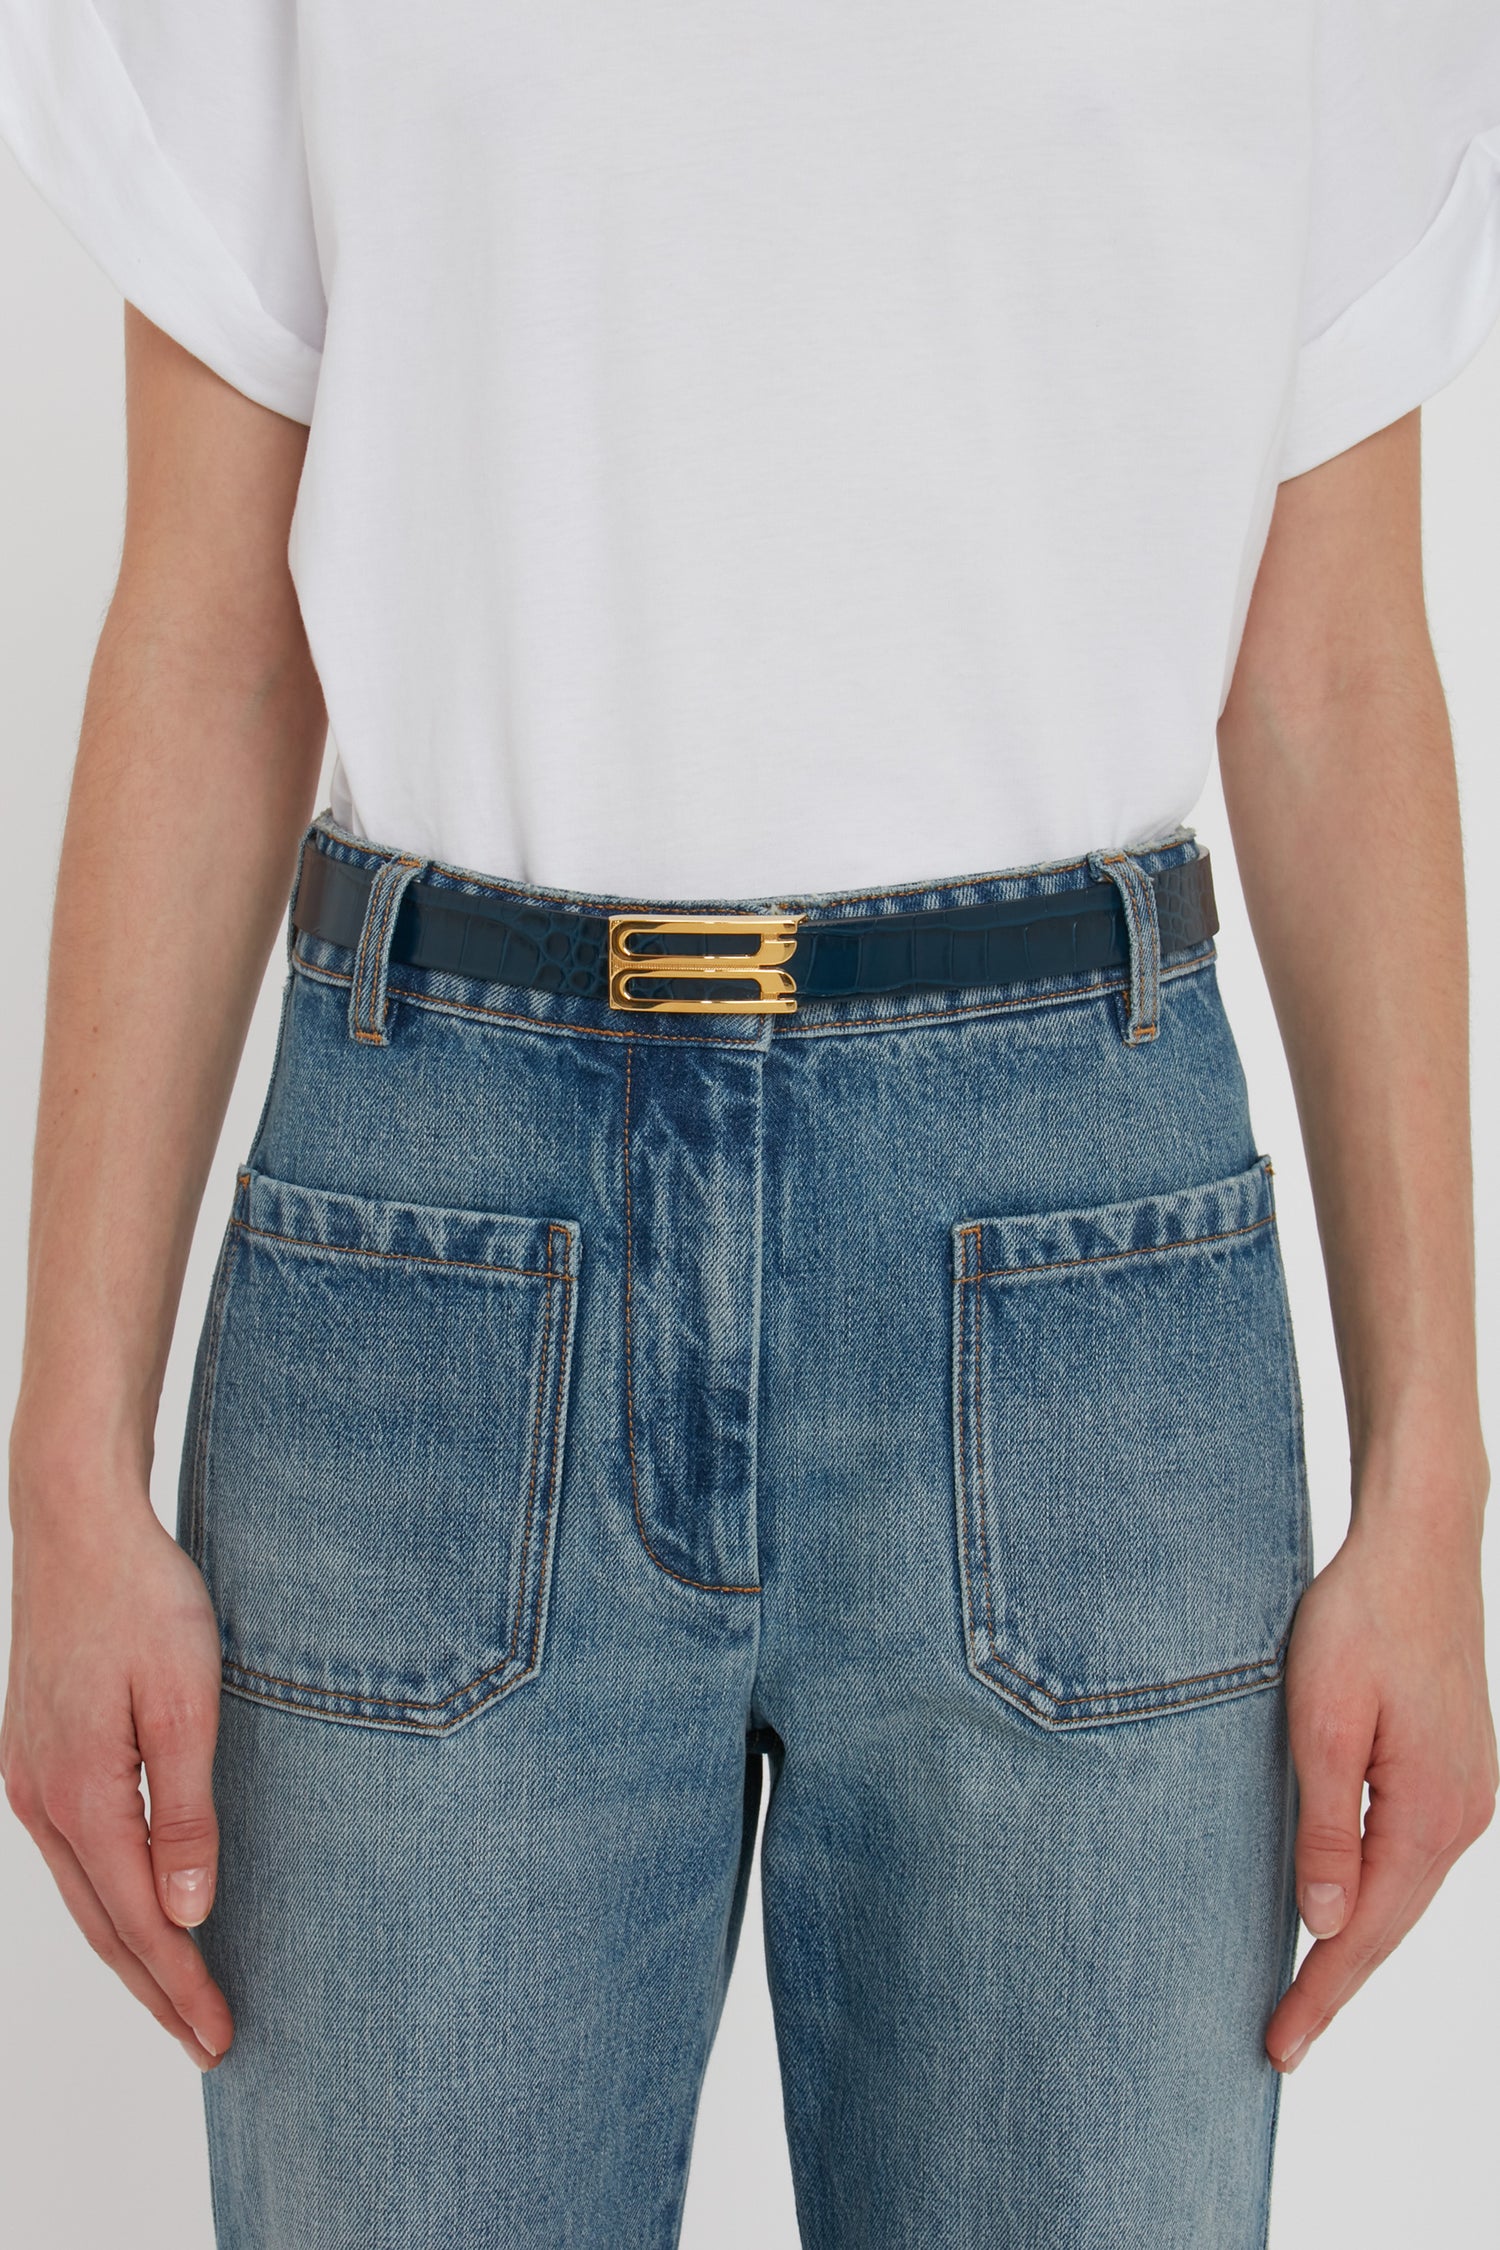 Person wearing a white t-shirt, blue jeans with large front pockets, and a Victoria Beckham Frame Belt In Midnight Blue Croc Embossed Calf Leather.